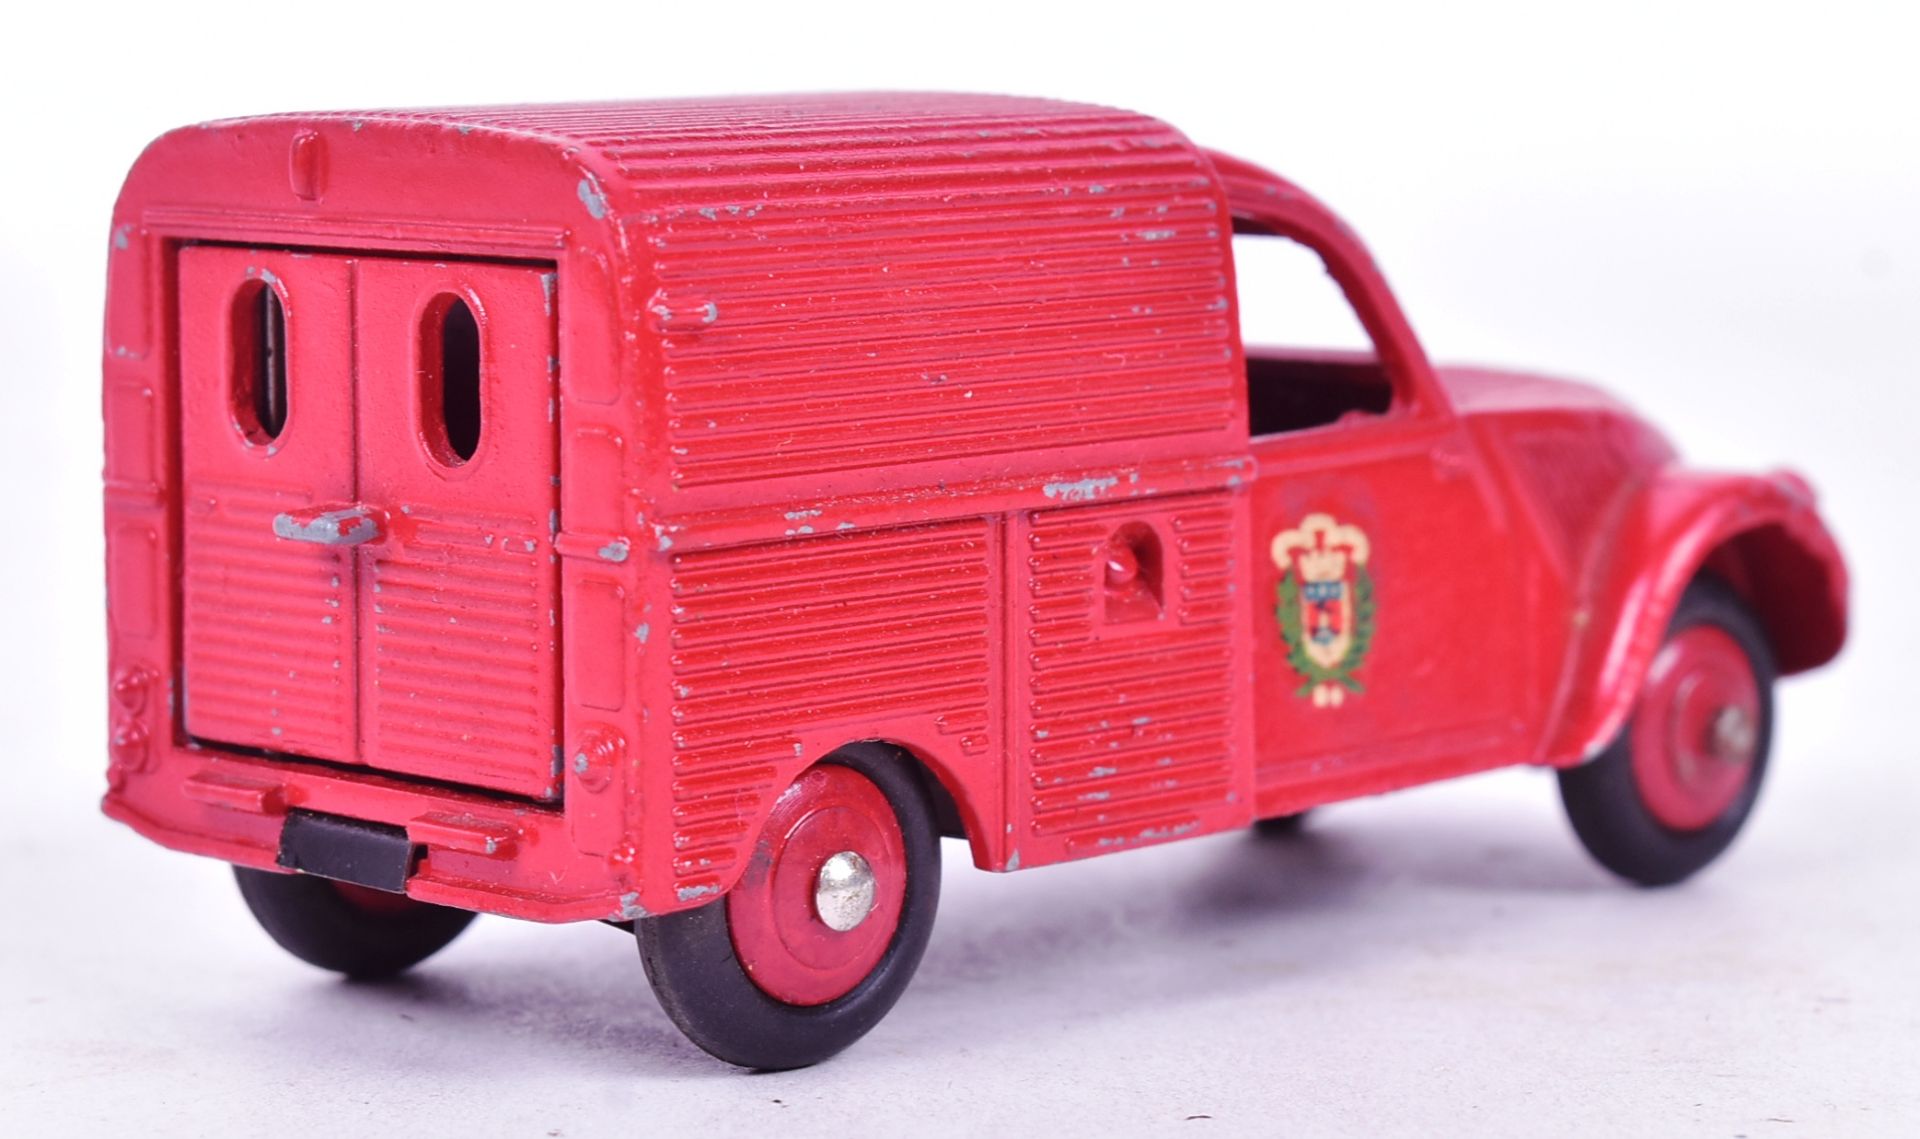 DIECAST - FRENCH DINKY TOYS - CITROEN 2CV FIRE VAN - Image 4 of 6